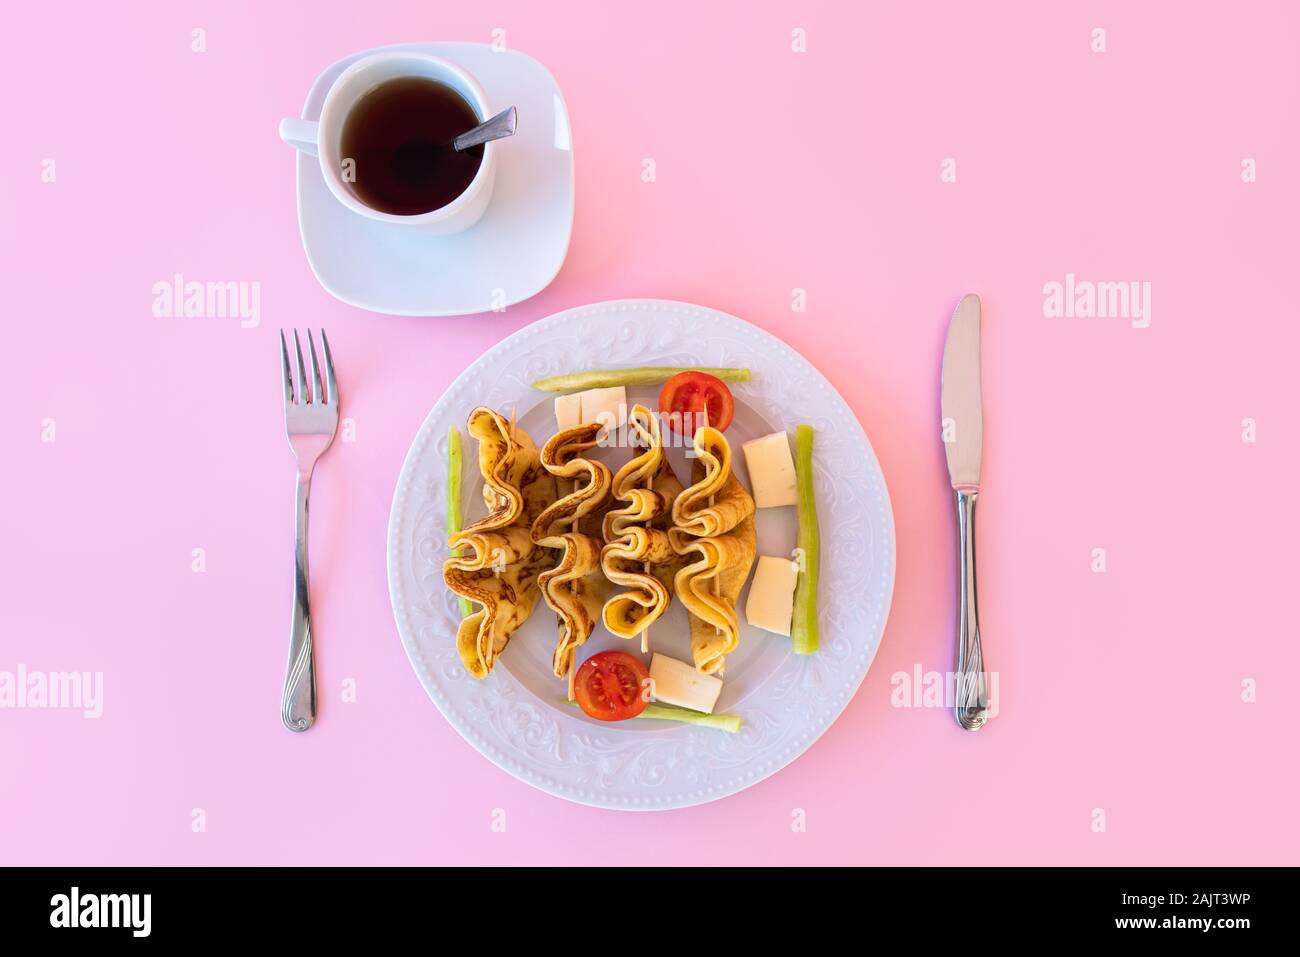 Tea time, cup of freshly brewed tea, warm soft and light and as aperatif plate of crepe with pink background. Stock Photo